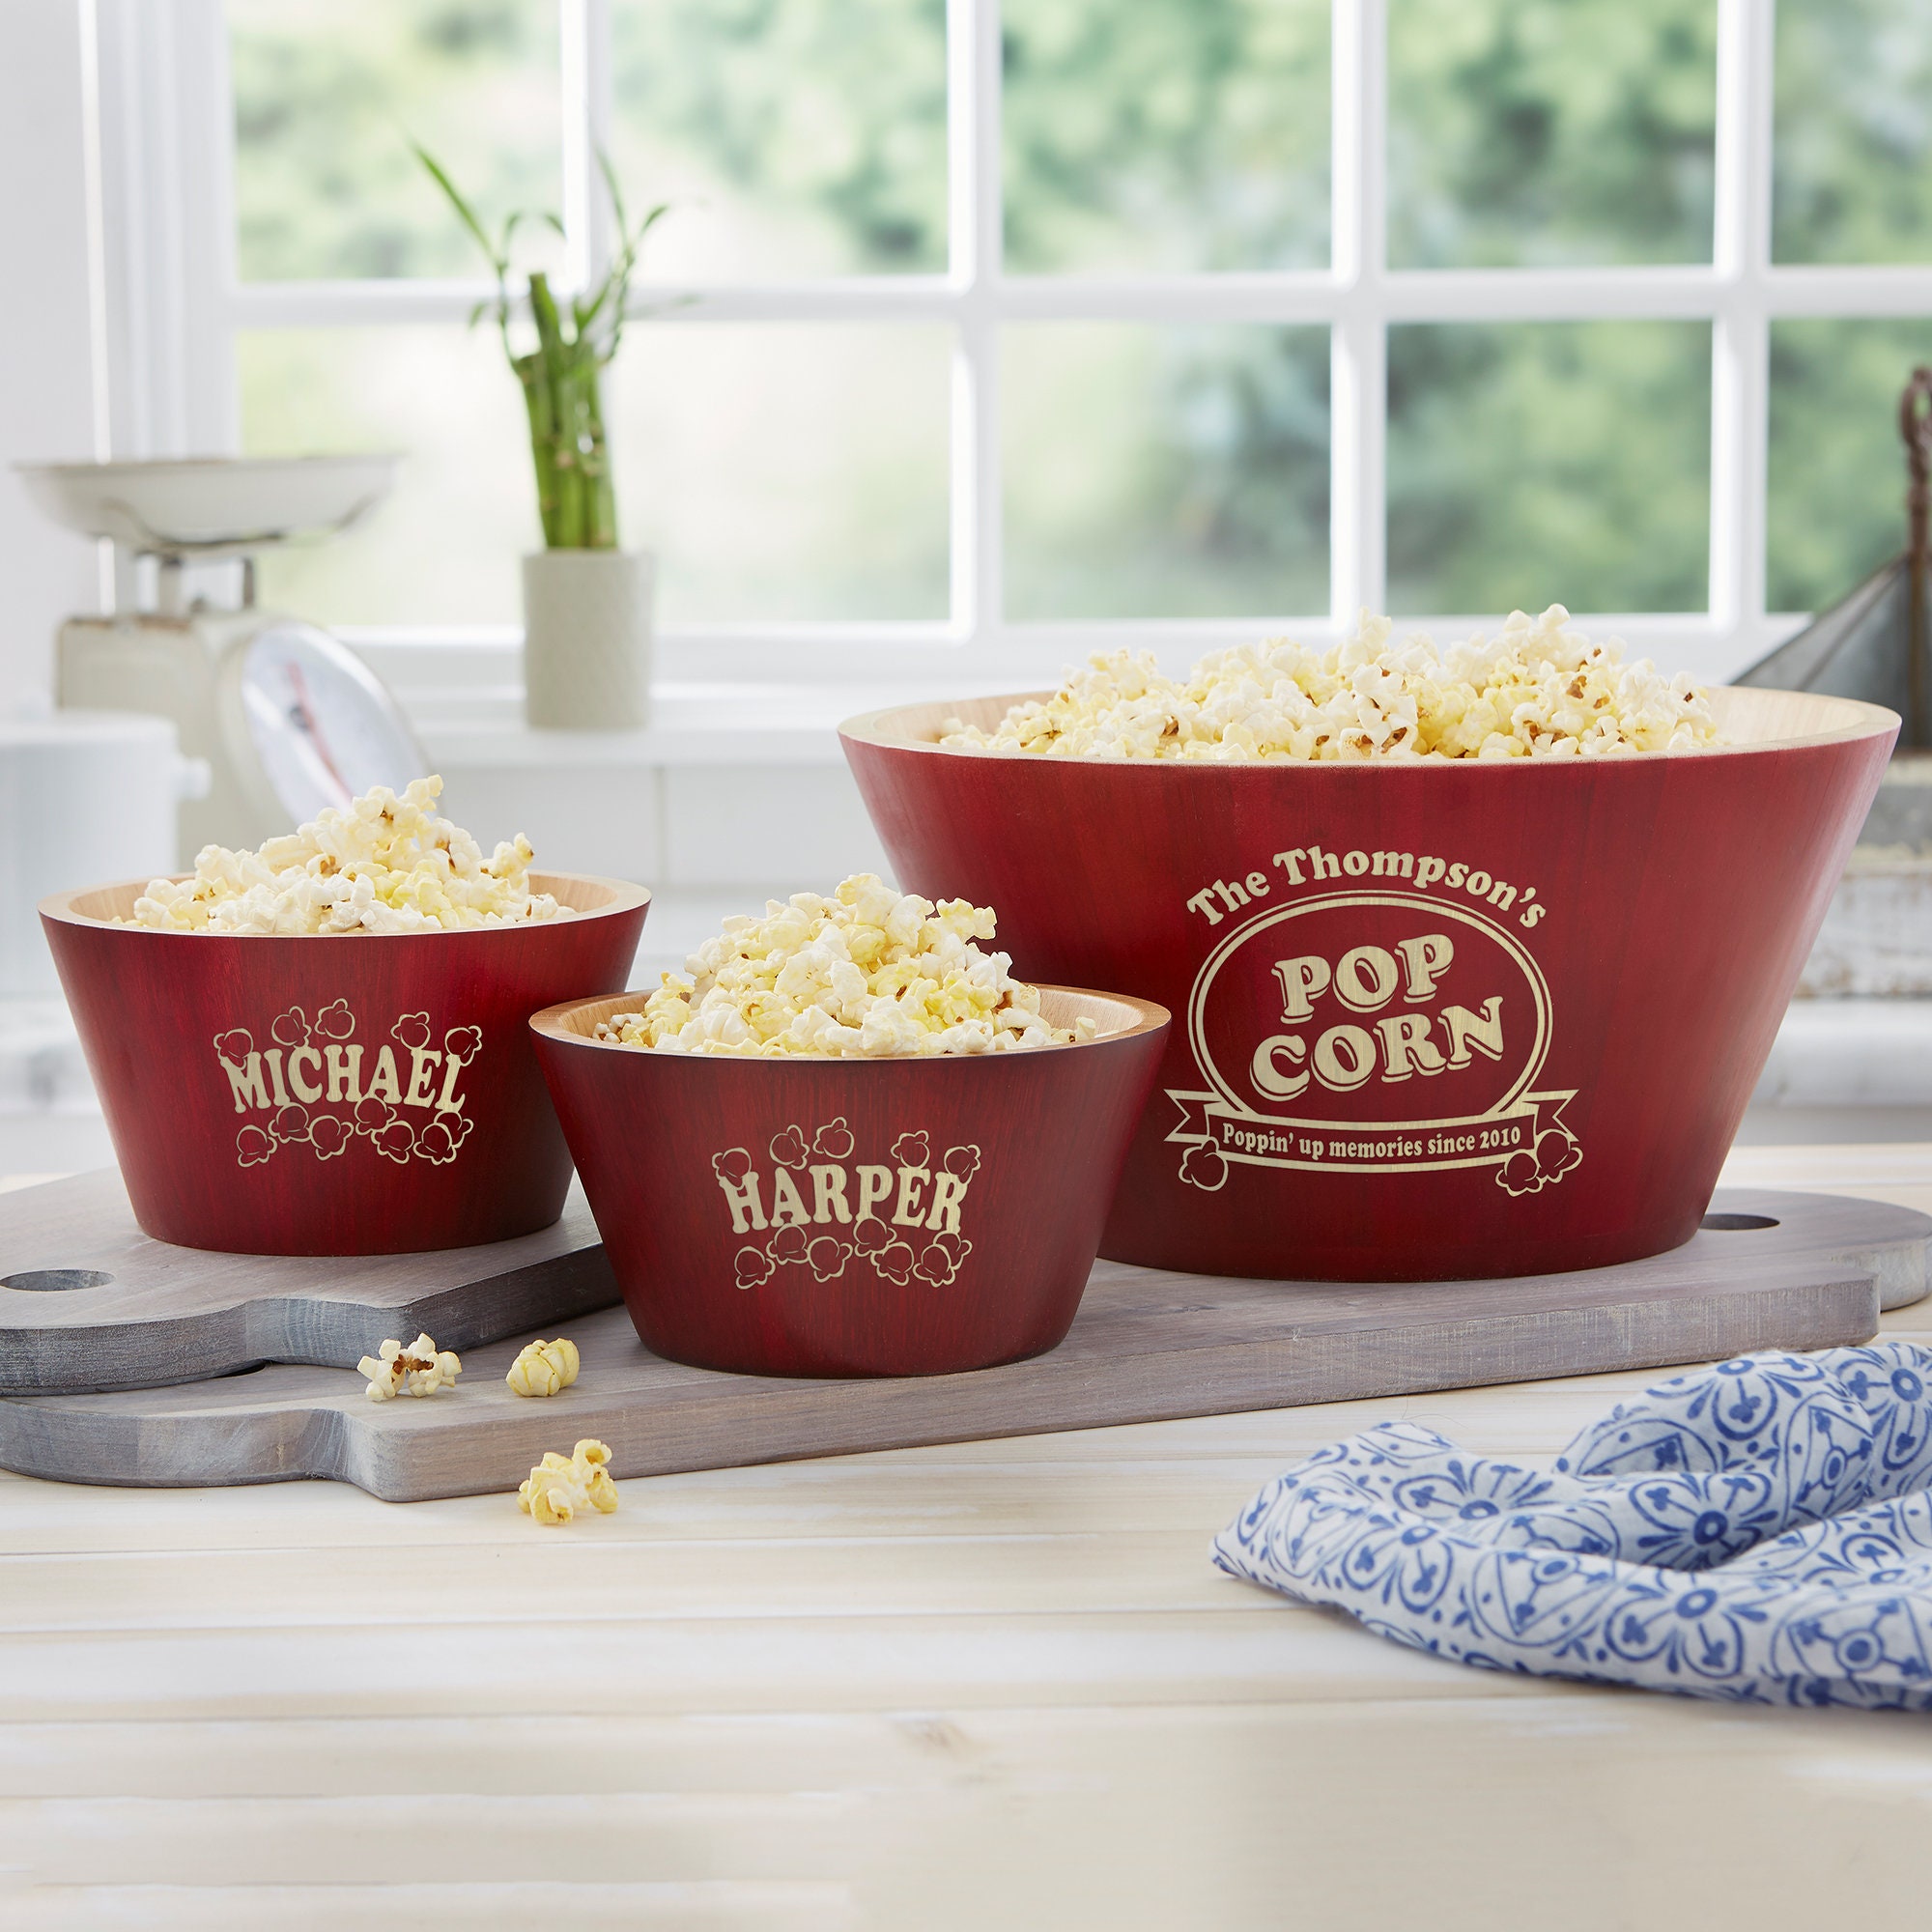 Popcorn Night Bamboo Personalized Serving Bowl, Gifts for Couples,  Housewarming Gifts, Popcorn Lover Gifts 